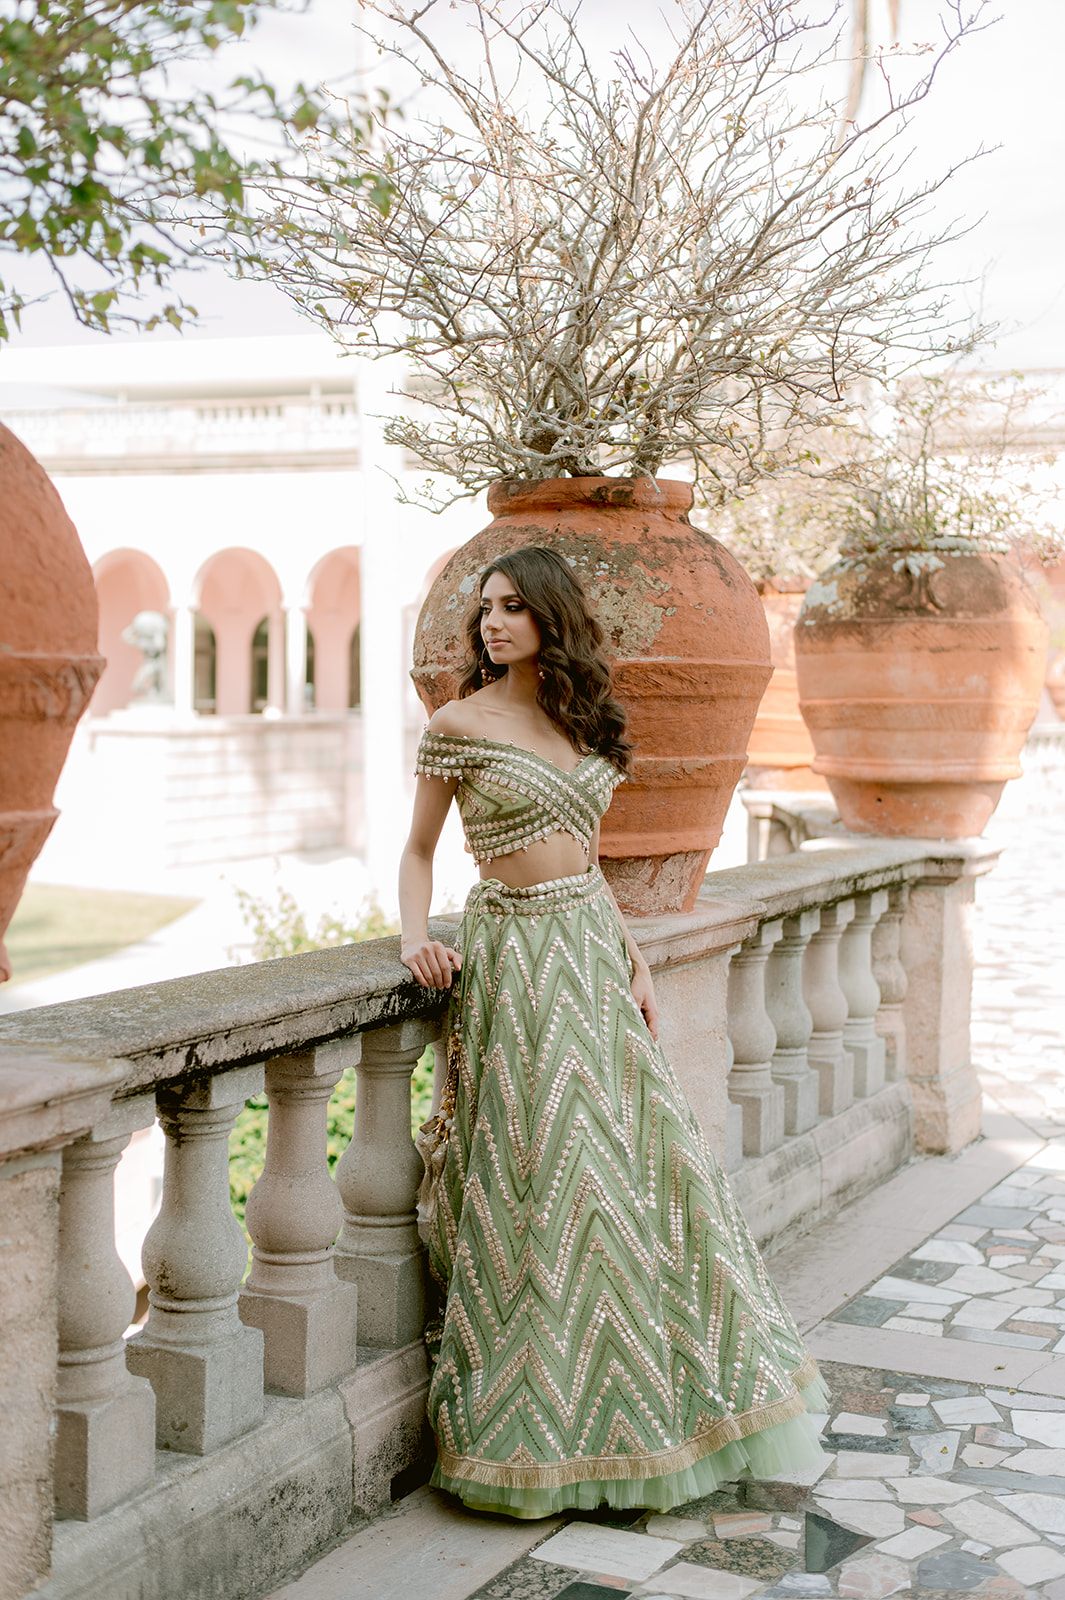 "Ringling Museum engagement shoot with Indian couple in beautiful traditional attire"
